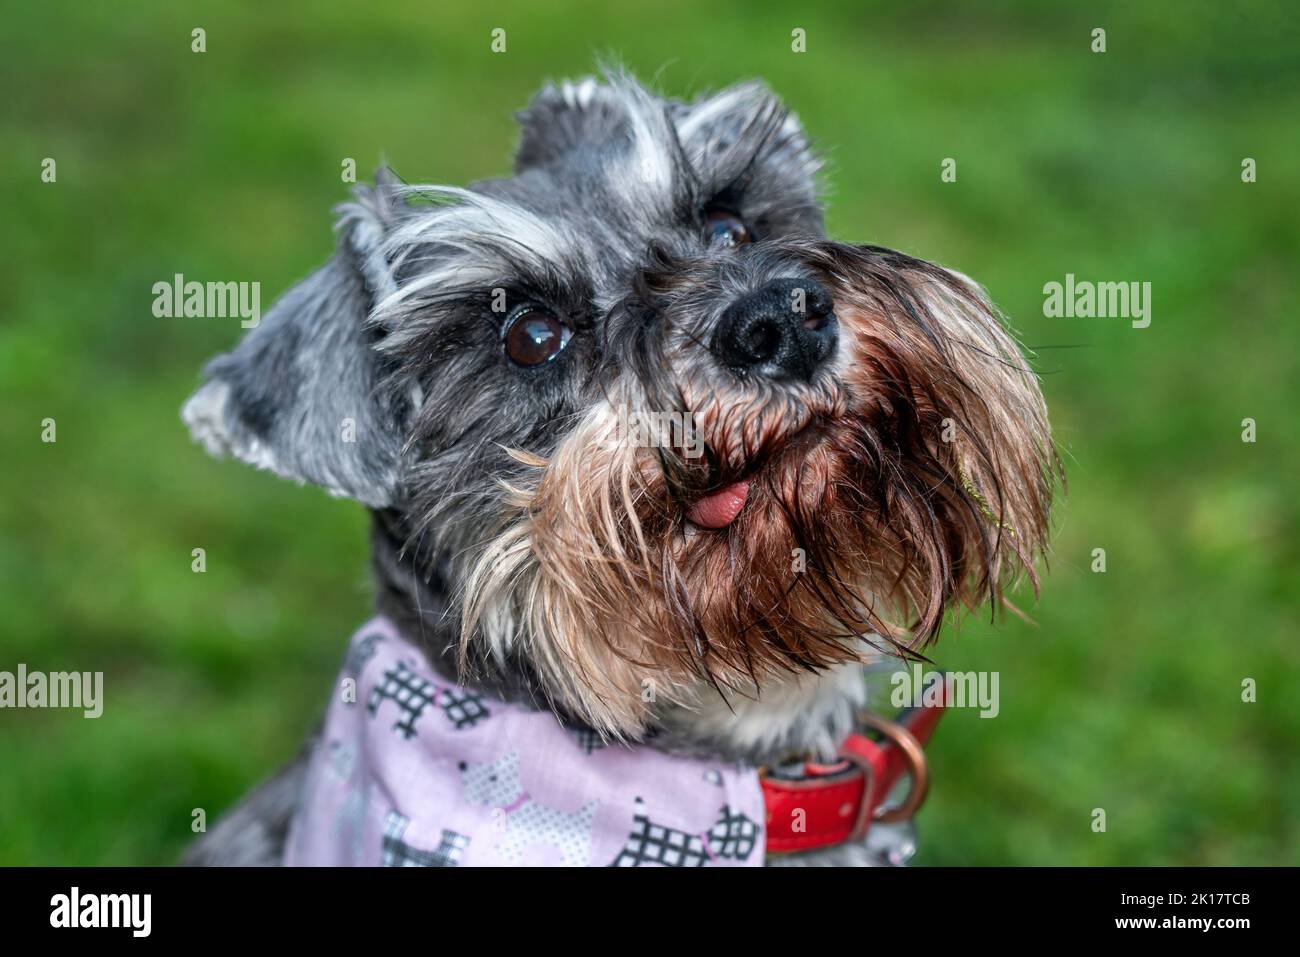 Miniature Schnauzer pet dog which is a popular canine purebred pedigree breed running and playing on a summer beach, stock photo image Stock Photo